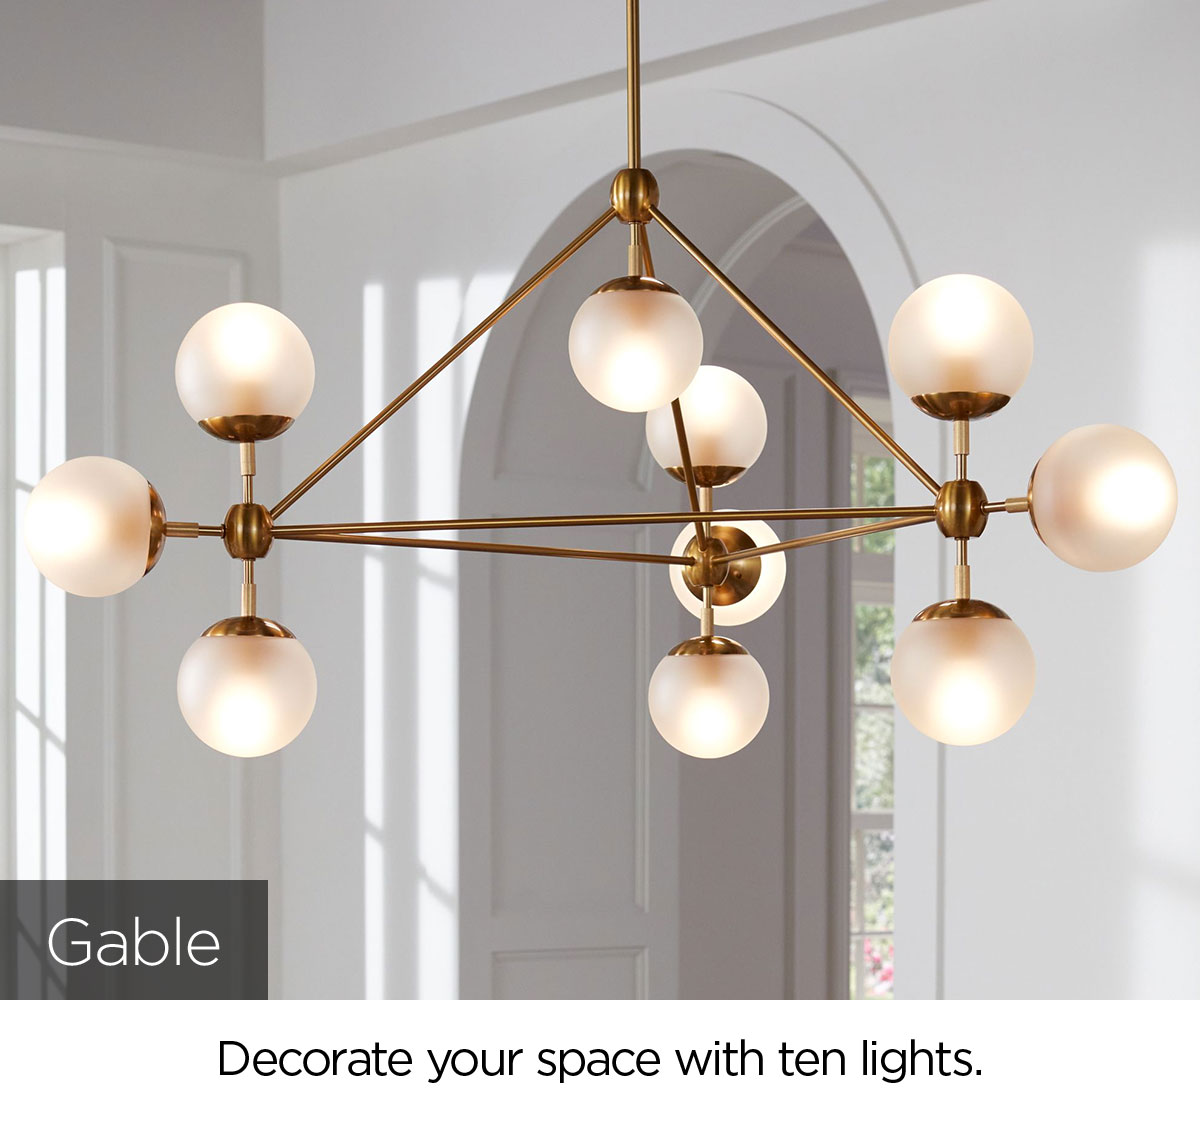 Gable - Decorate your space with ten lights.